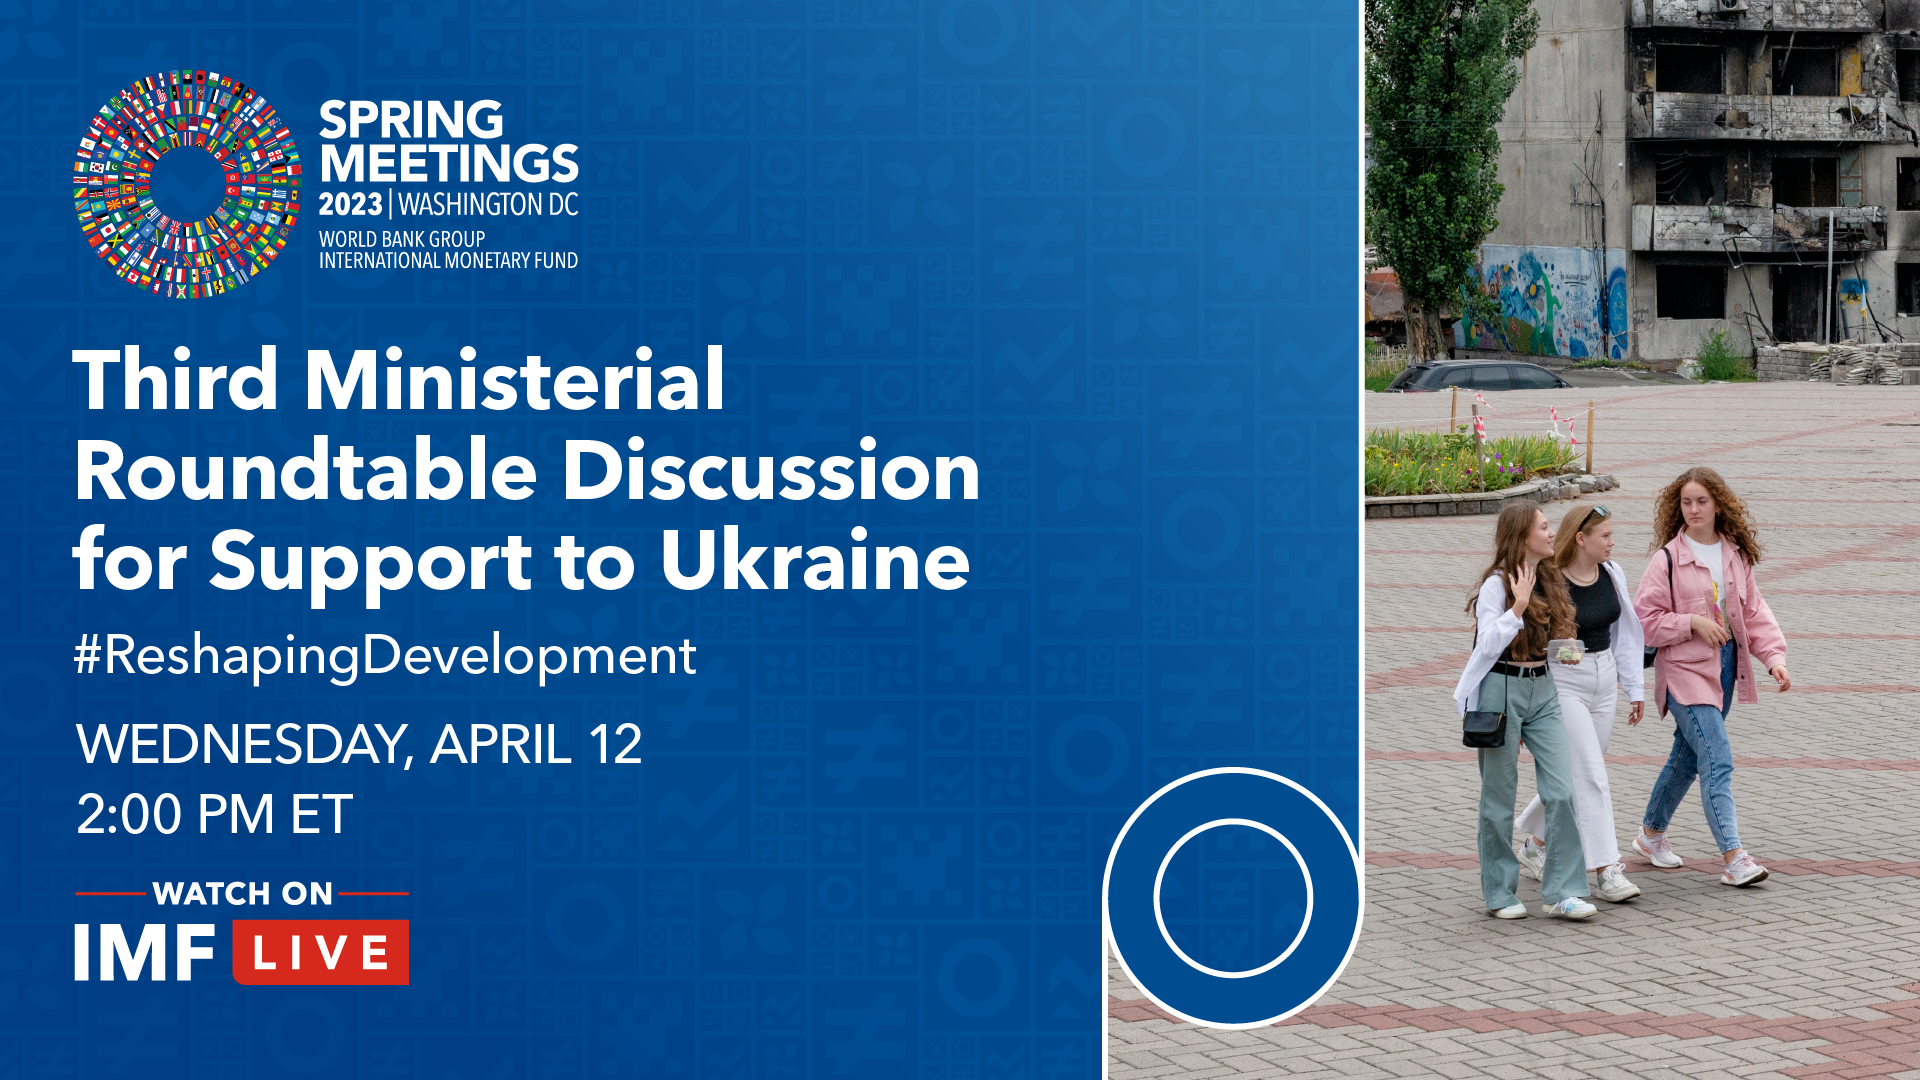 Third Ministerial Roundtable Discussion for Support to Ukraine